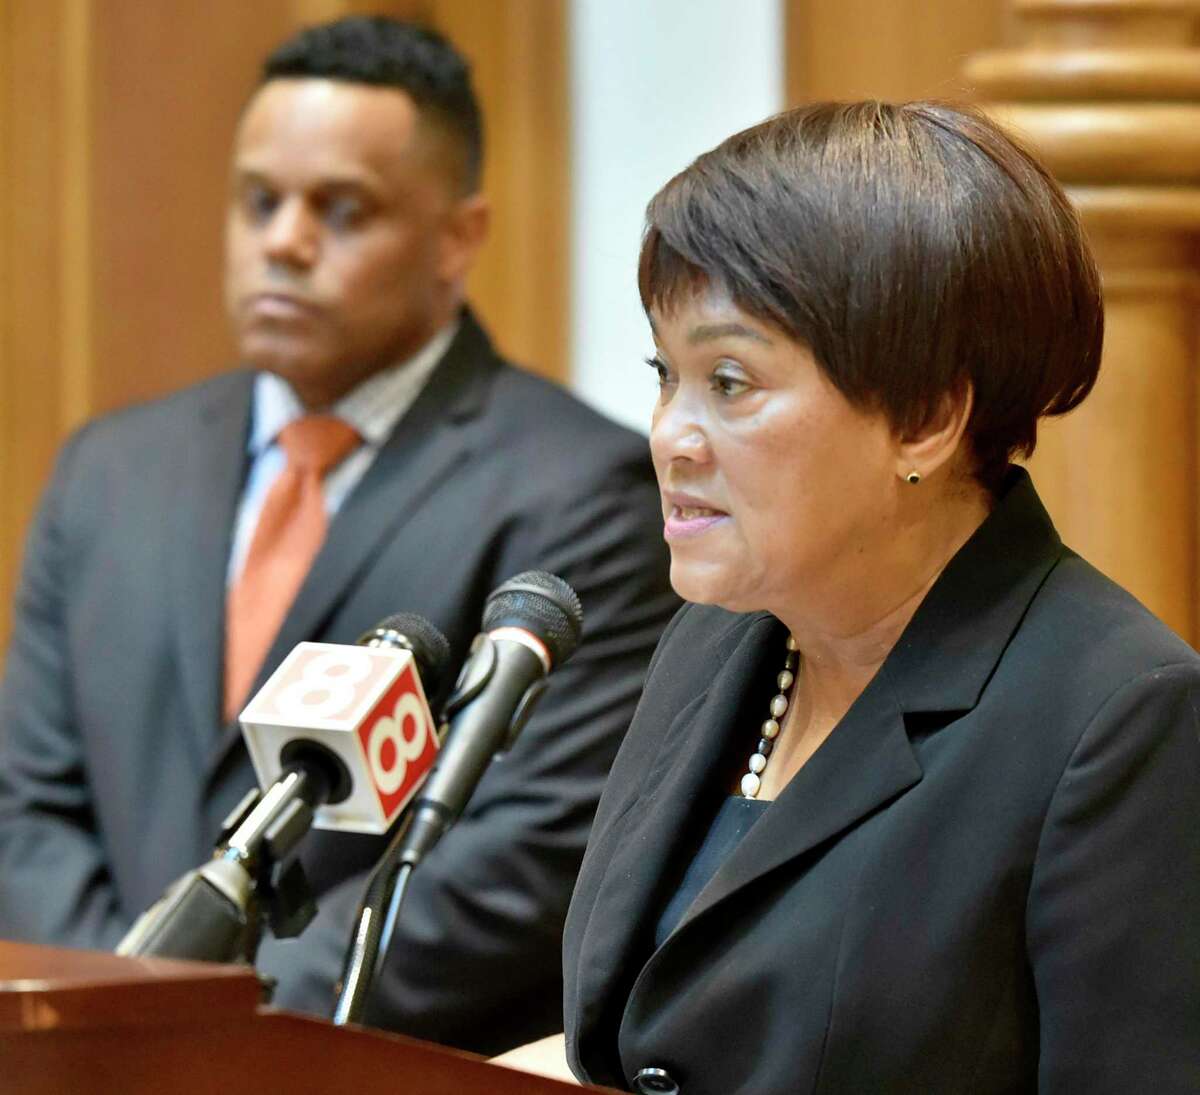 New Haven, Connecticut - Monday, August 12, 2019: New Haven Mayor Toni N. Harp, right, with Controller Daryl Jones, left, announce a comprehensive, five-year strategic financial plan for the City of New Haven during a press conference Monday afternoon at New Haven City Hall.